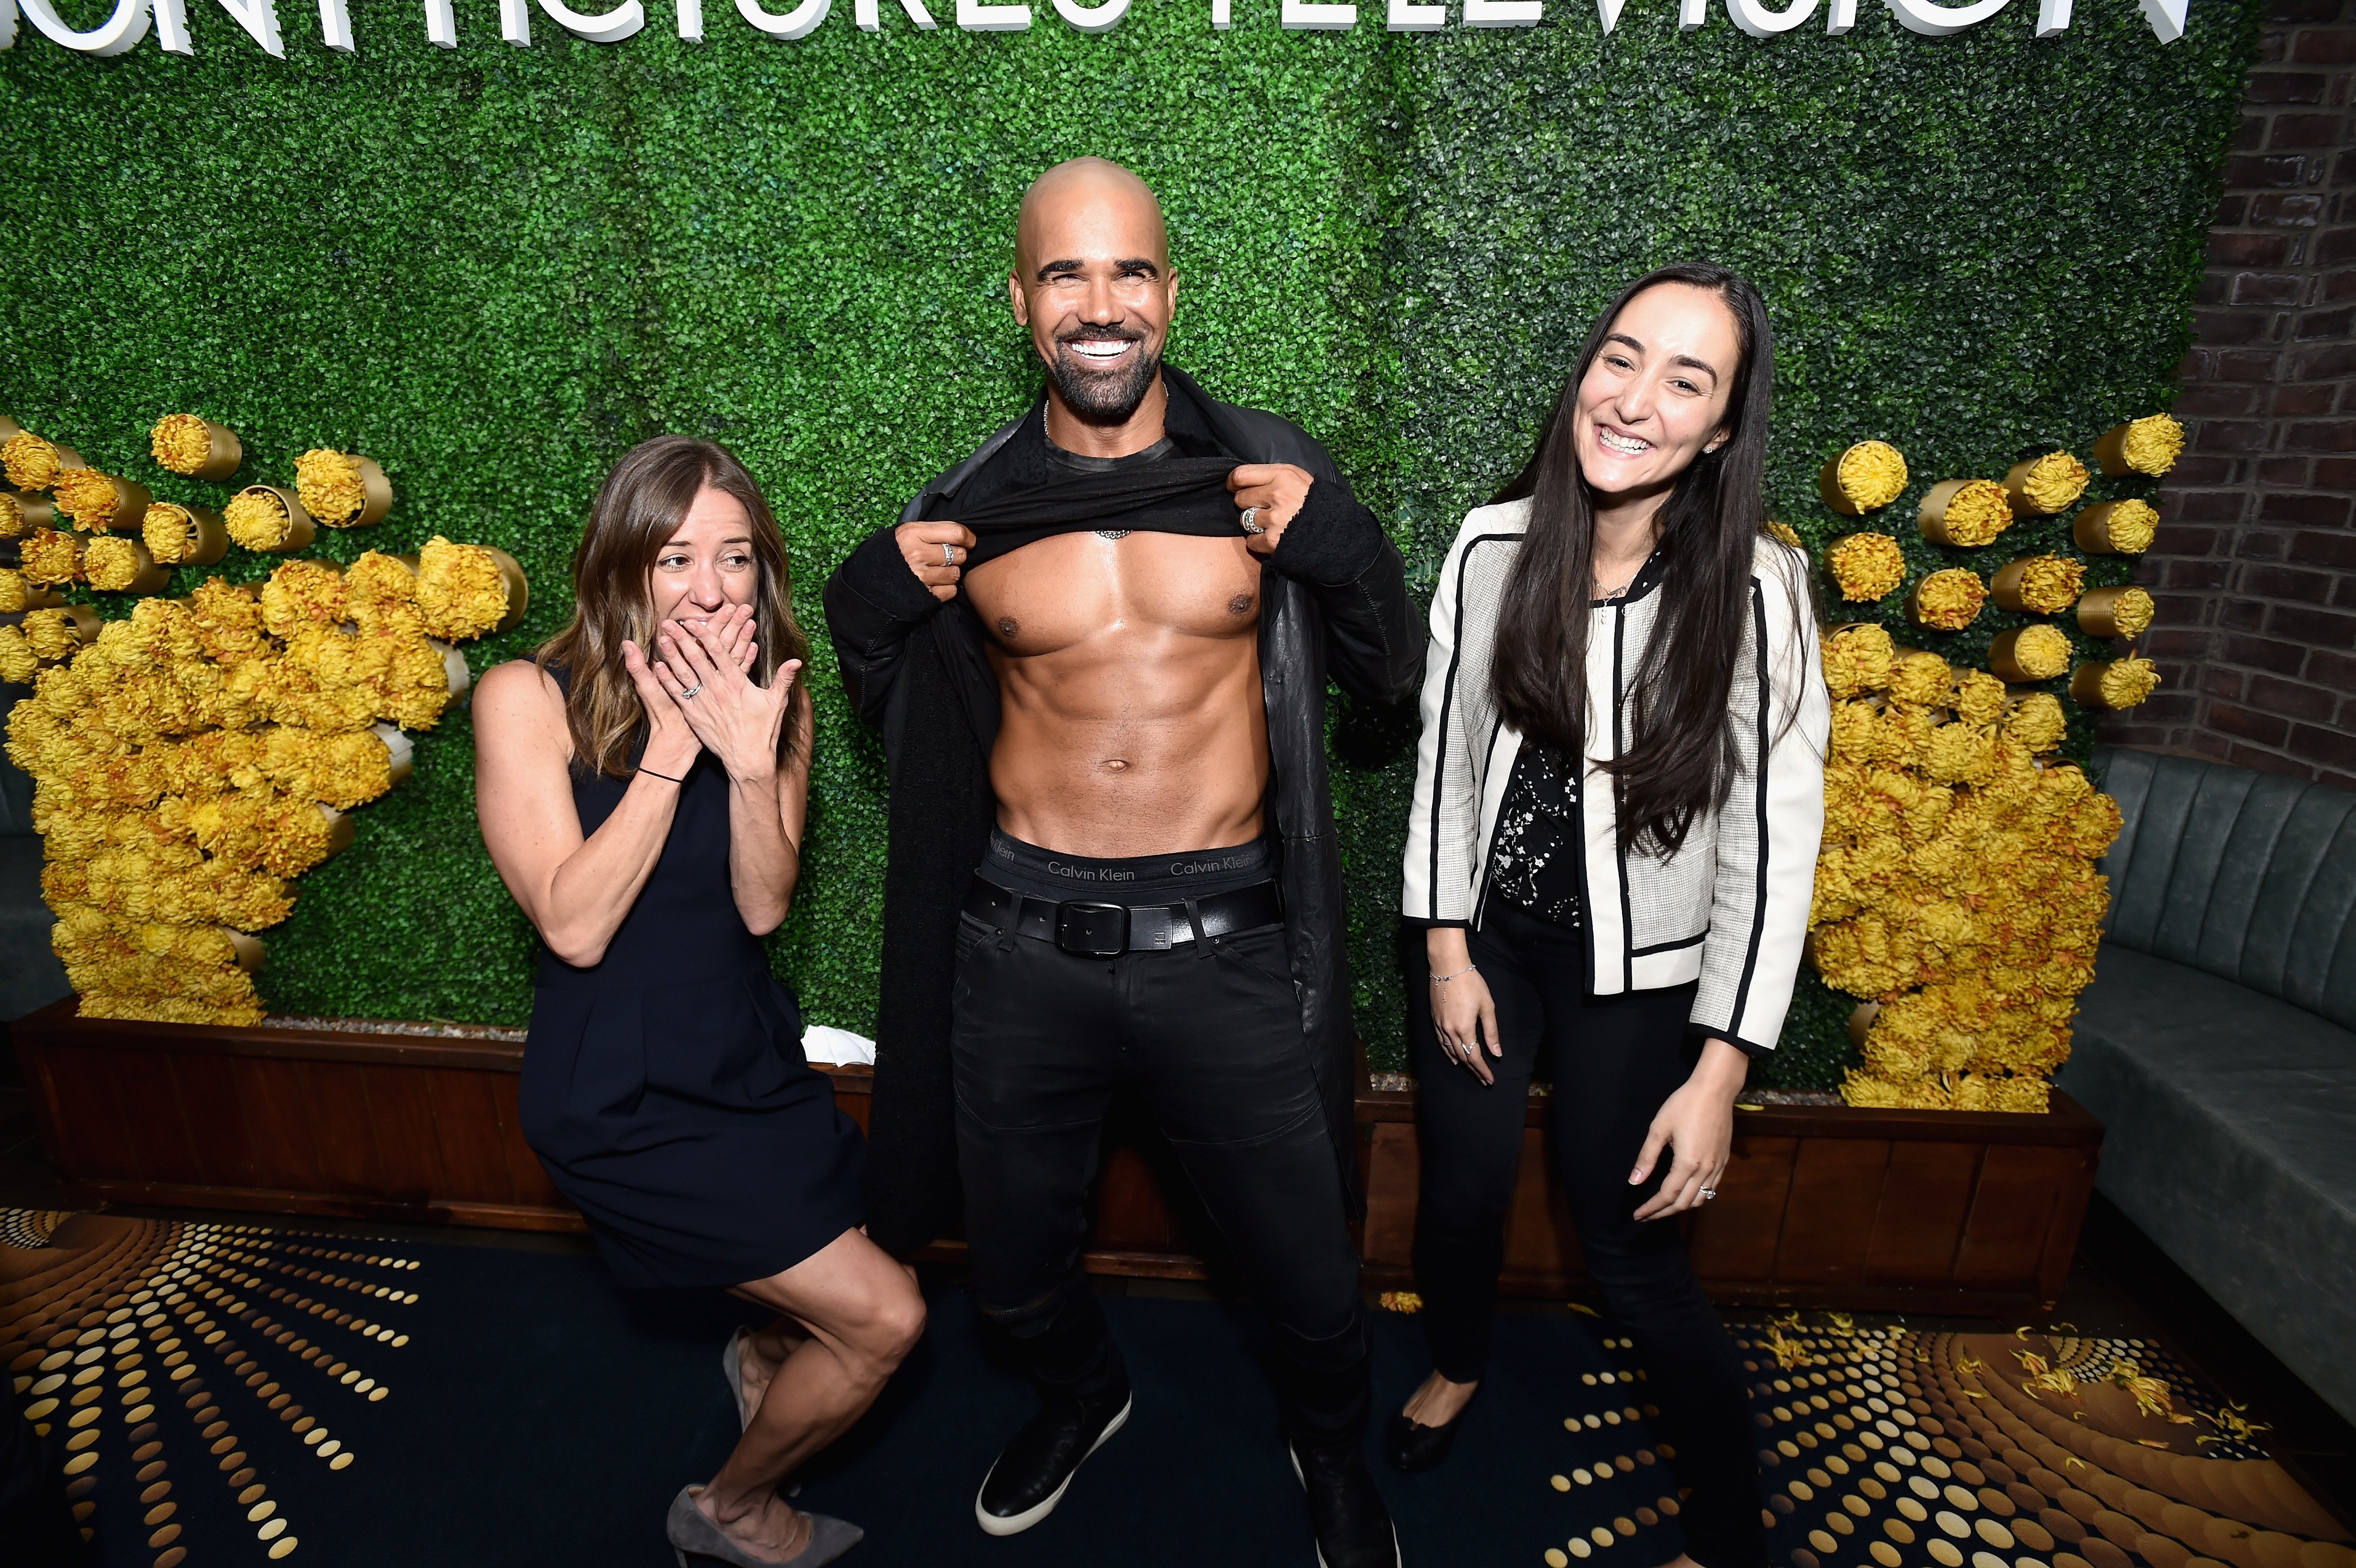 Shemar Moore and fans at the Sony Pictures Television LA Screenings Party on May 24, 2017 | Photo: GettyImages